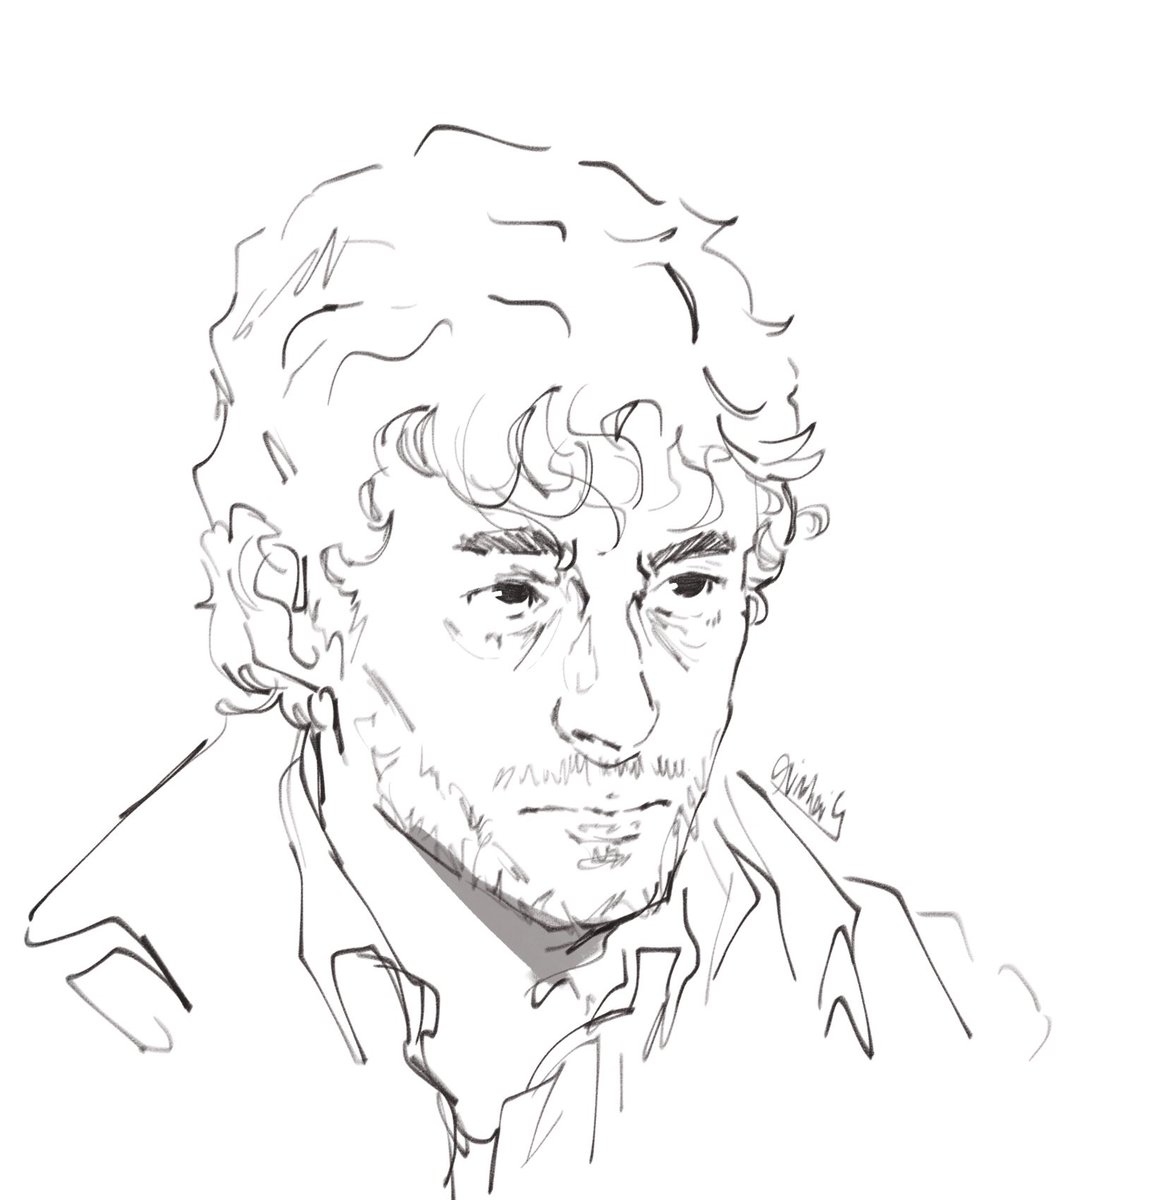 Why nobody told me Hannibal is incredible? It became my new hyperfixation rn #willgraham #hannibal #fanart